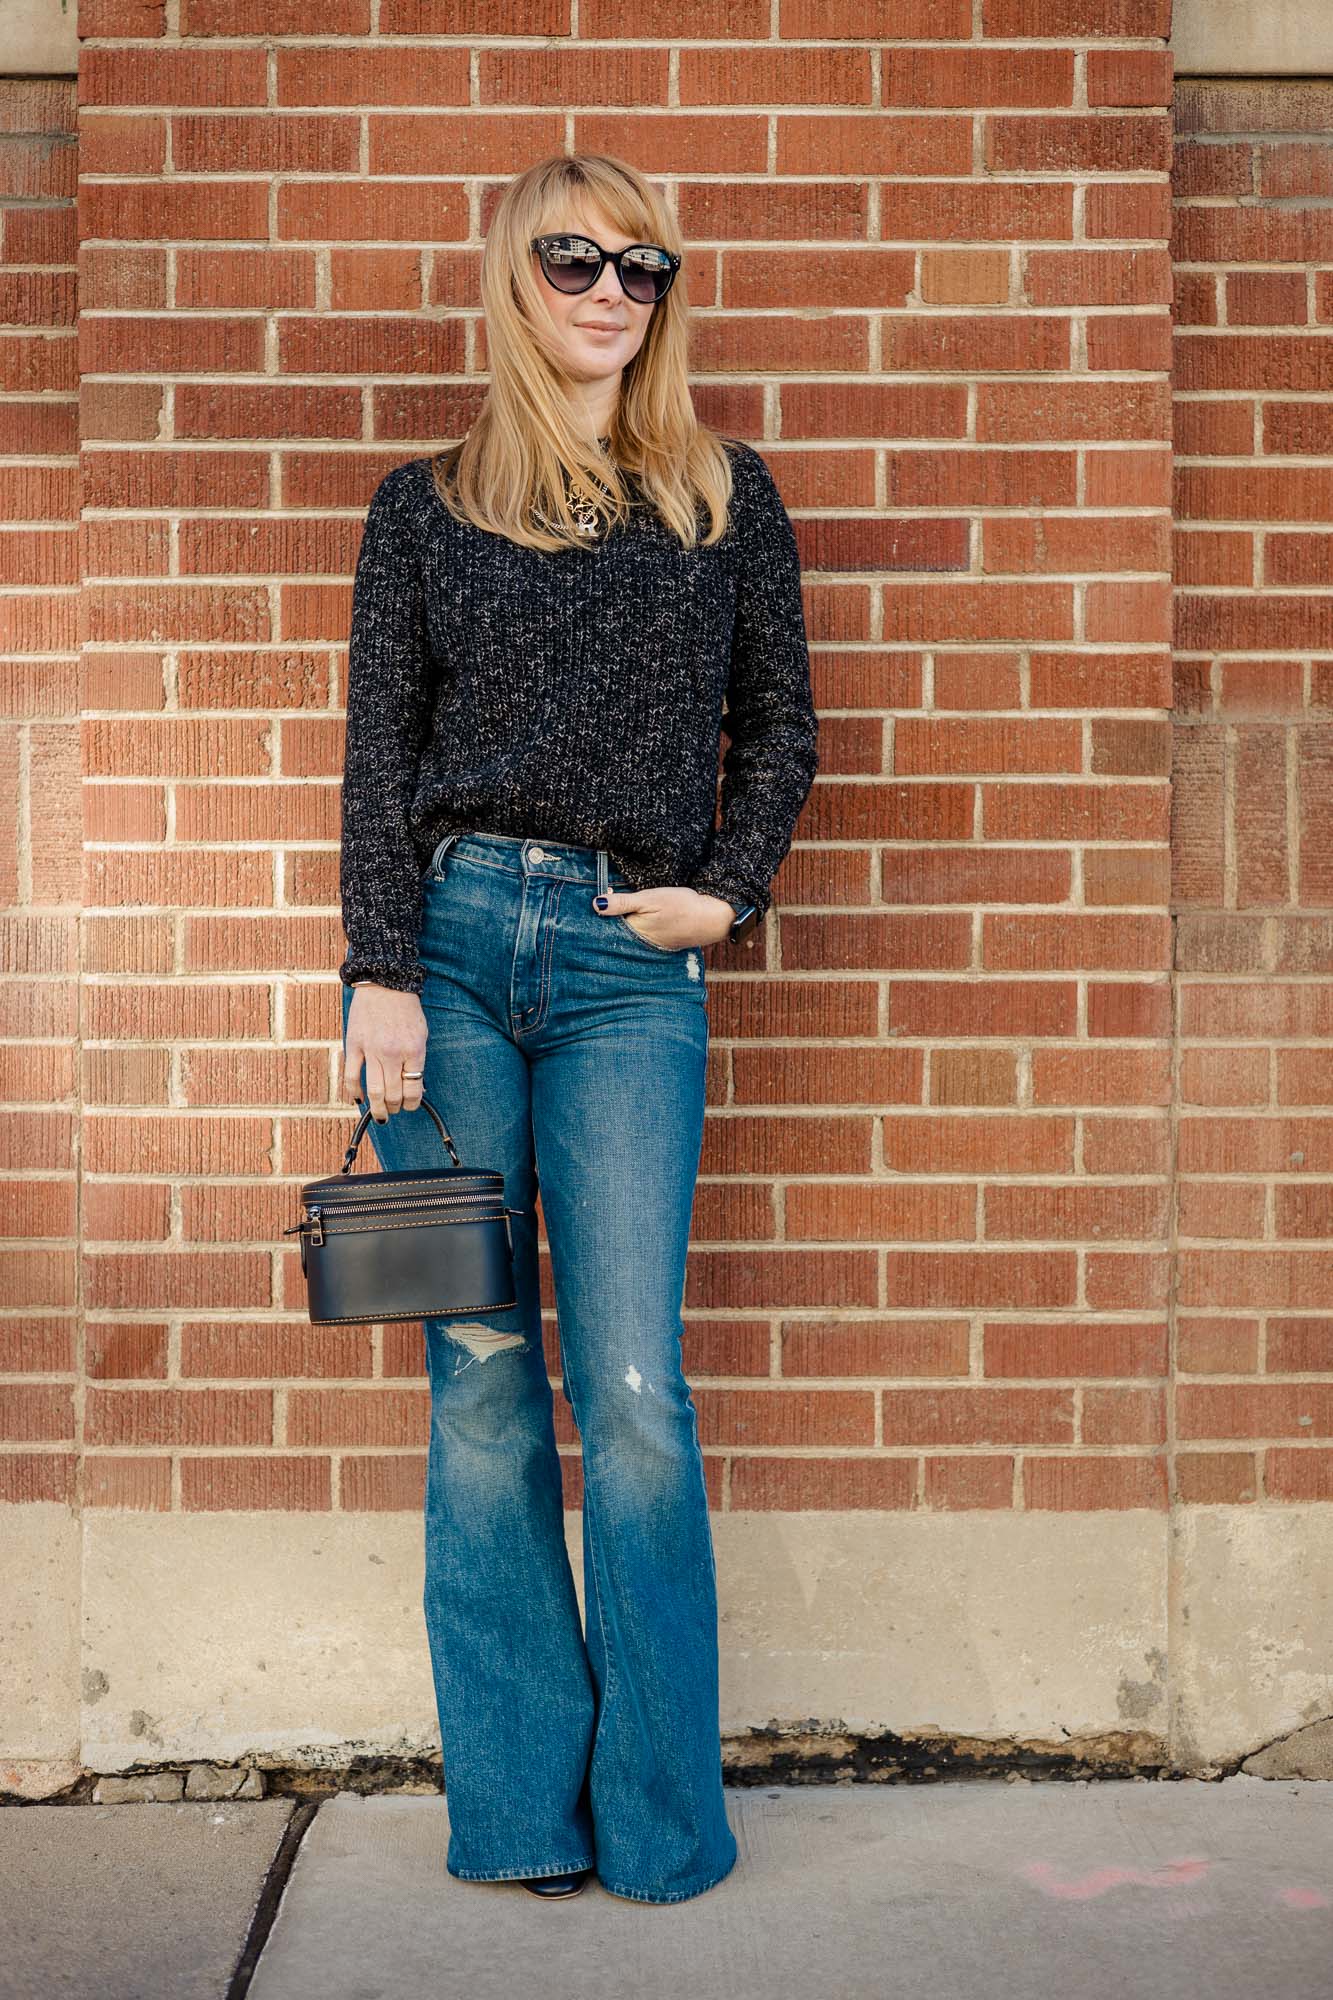 Wearing the Jenni Kayne cashmere fisherman sweater with mother flair jeans and a black Coach bag.